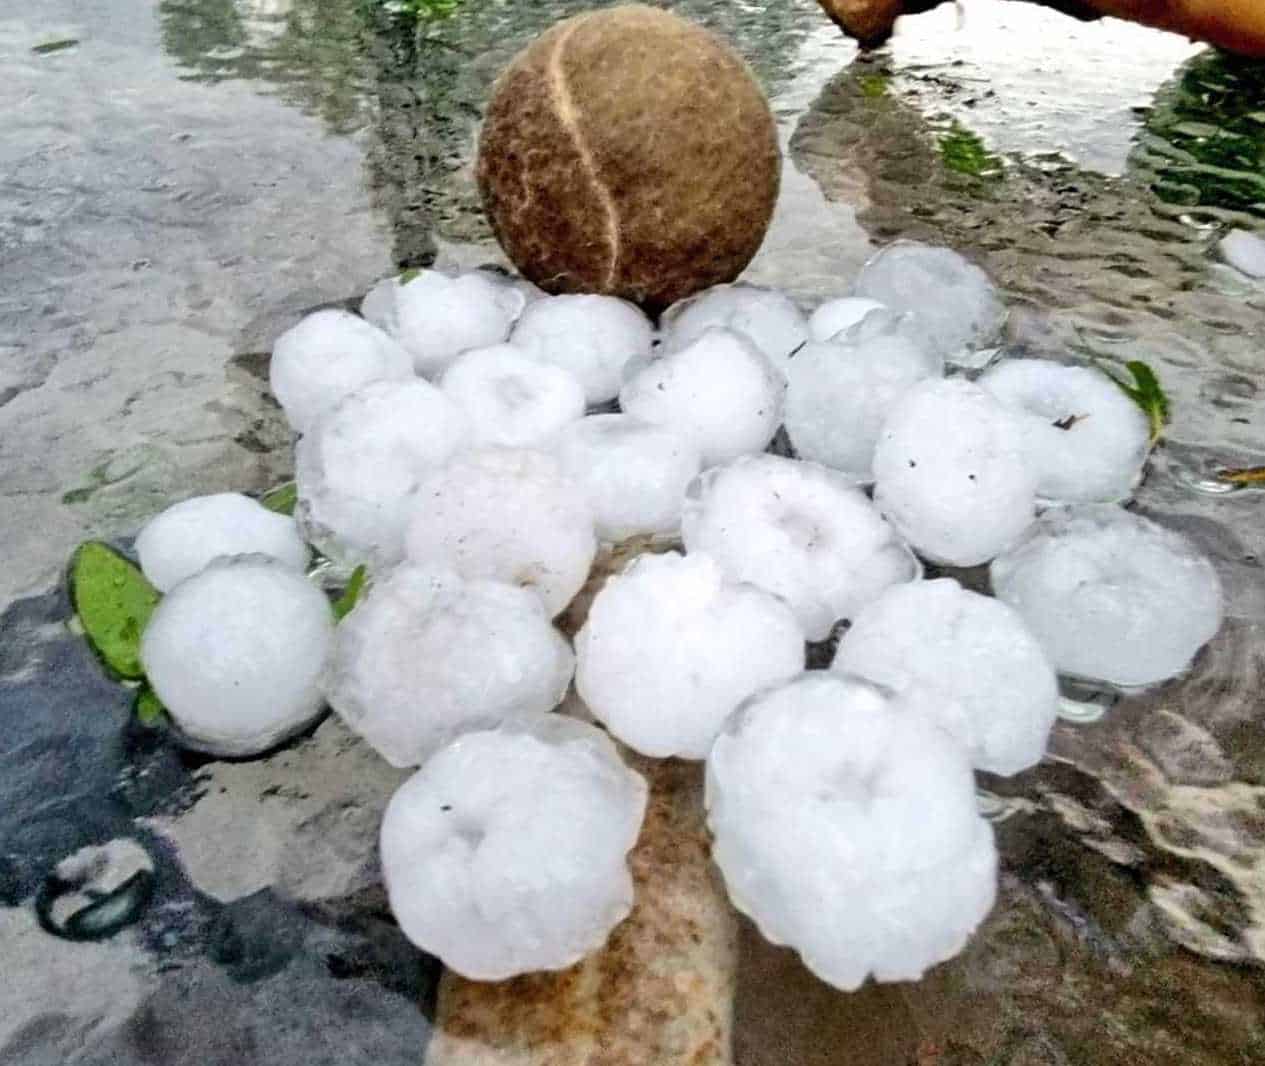 Pile of fallen Hail with bald tennis ball to show size, hail is smaller than the tennis ball